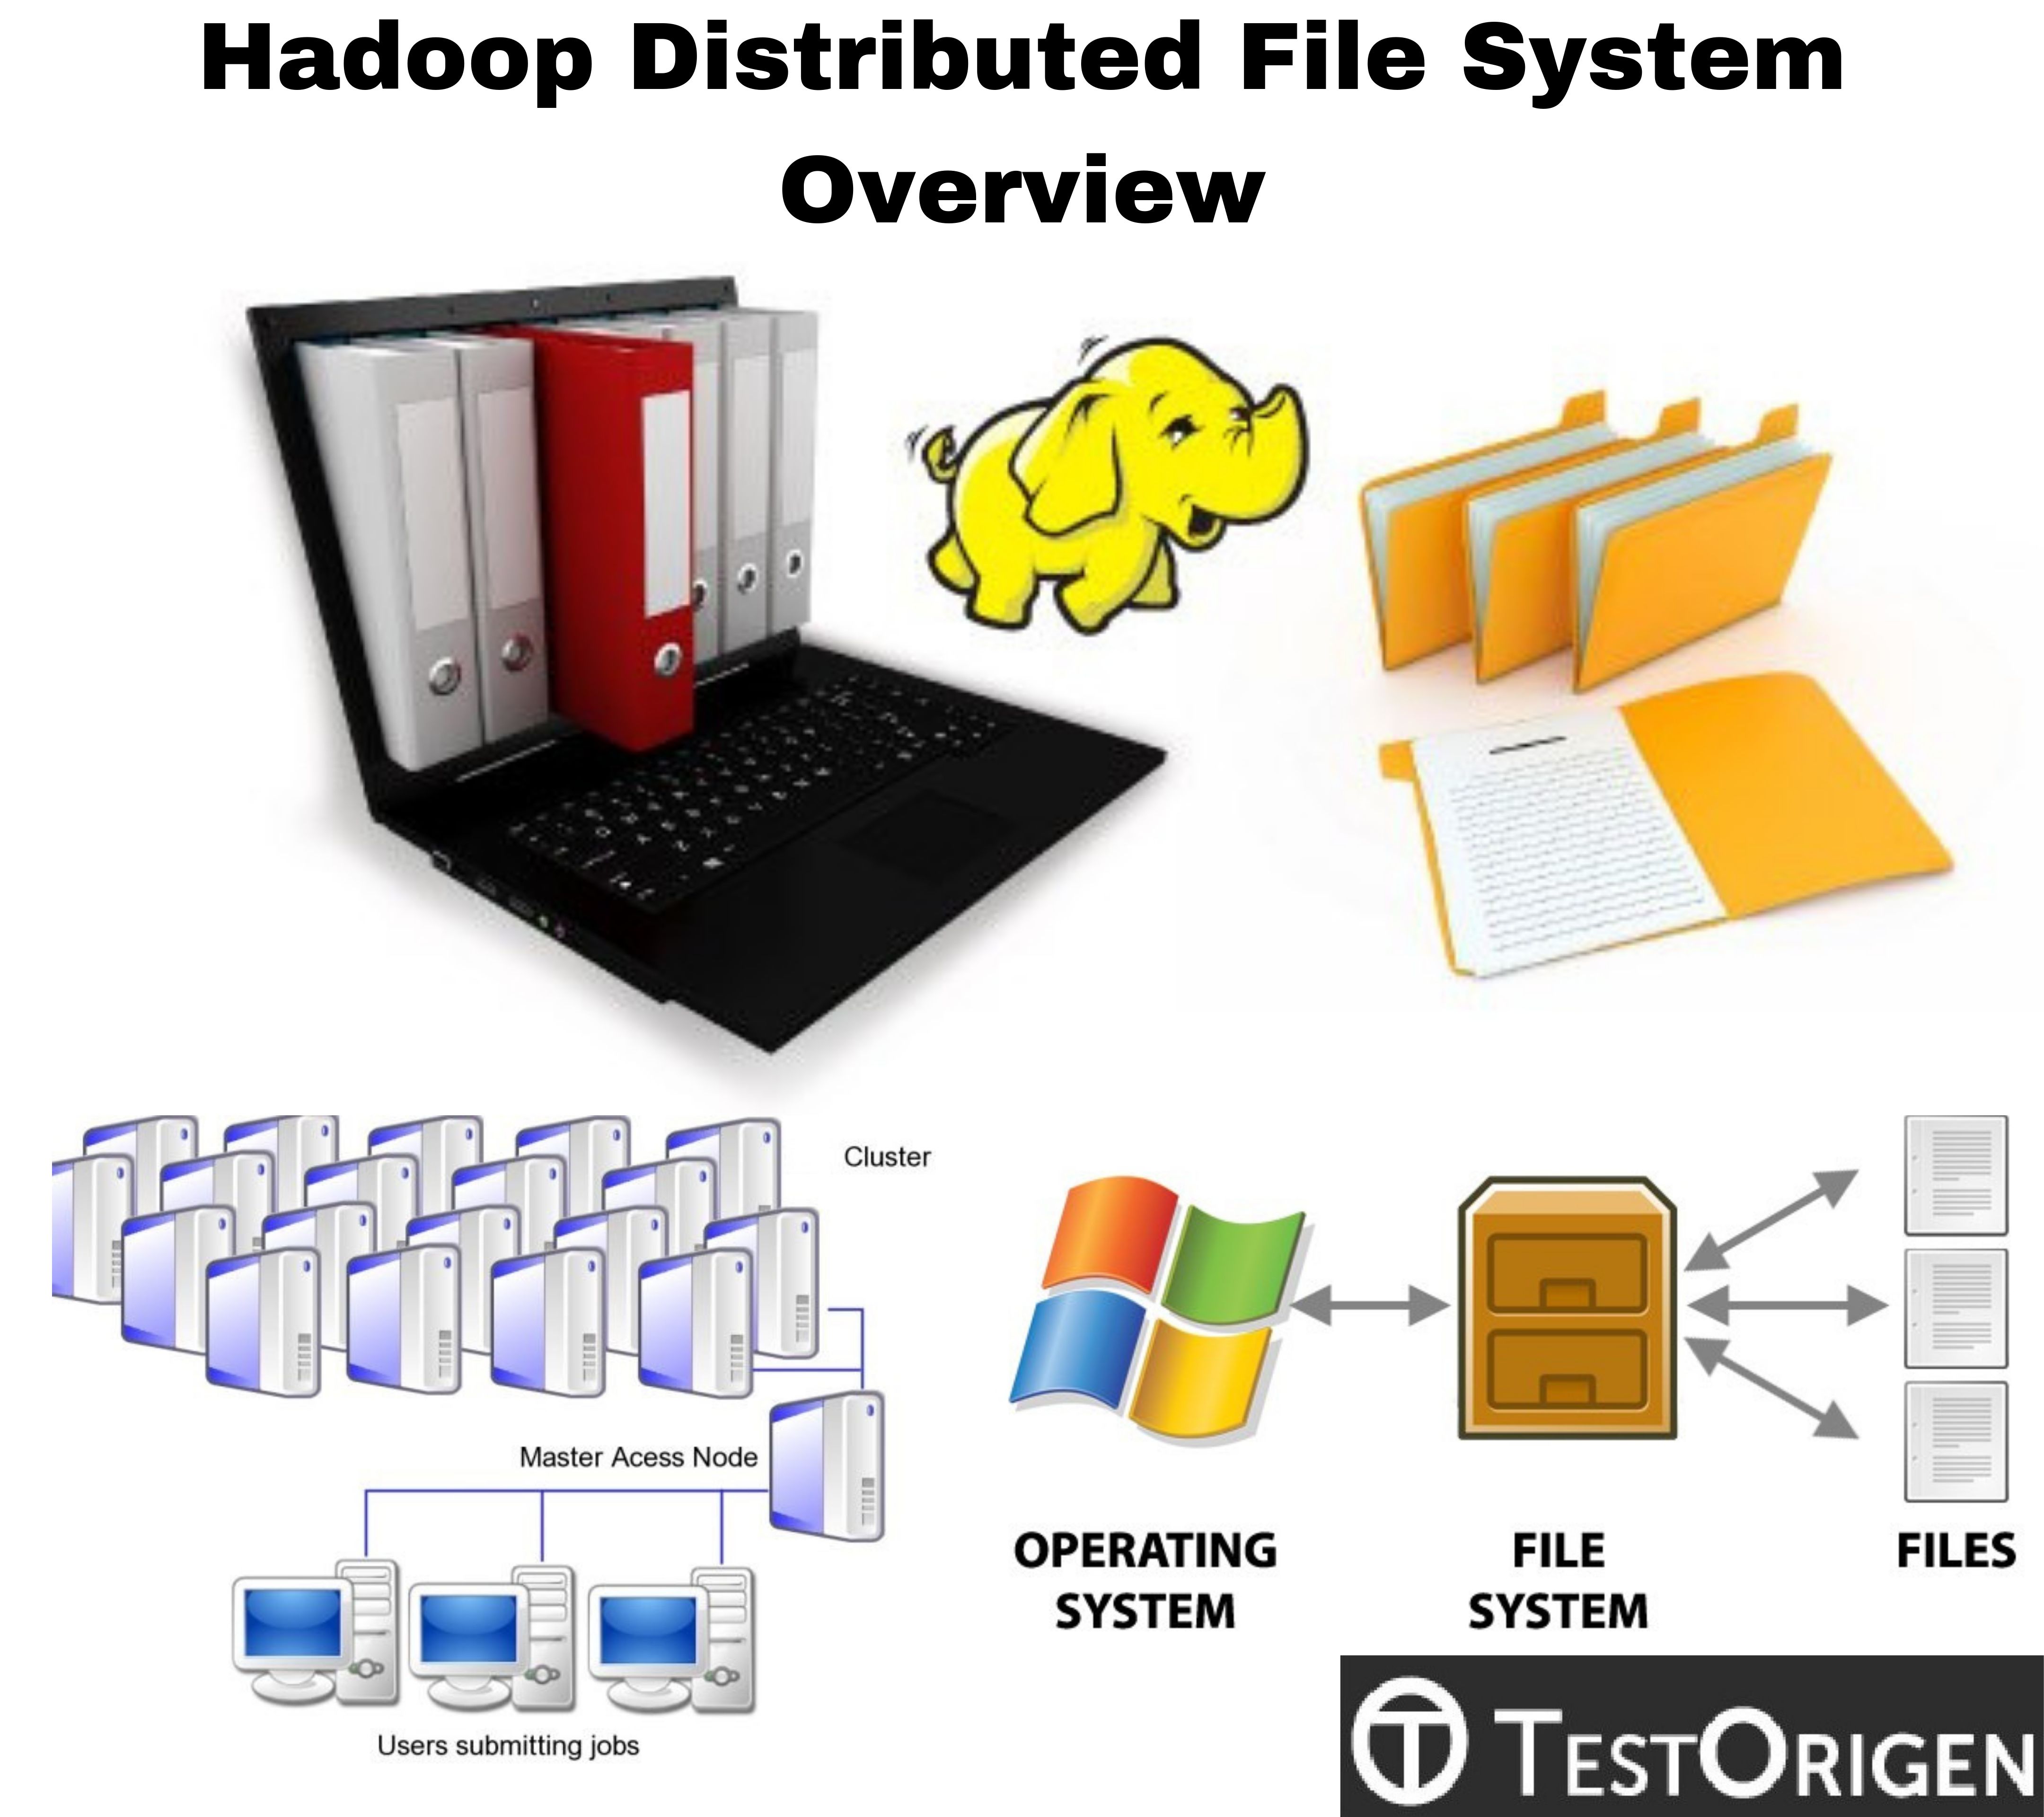 Hadoop Distributed File System Overview